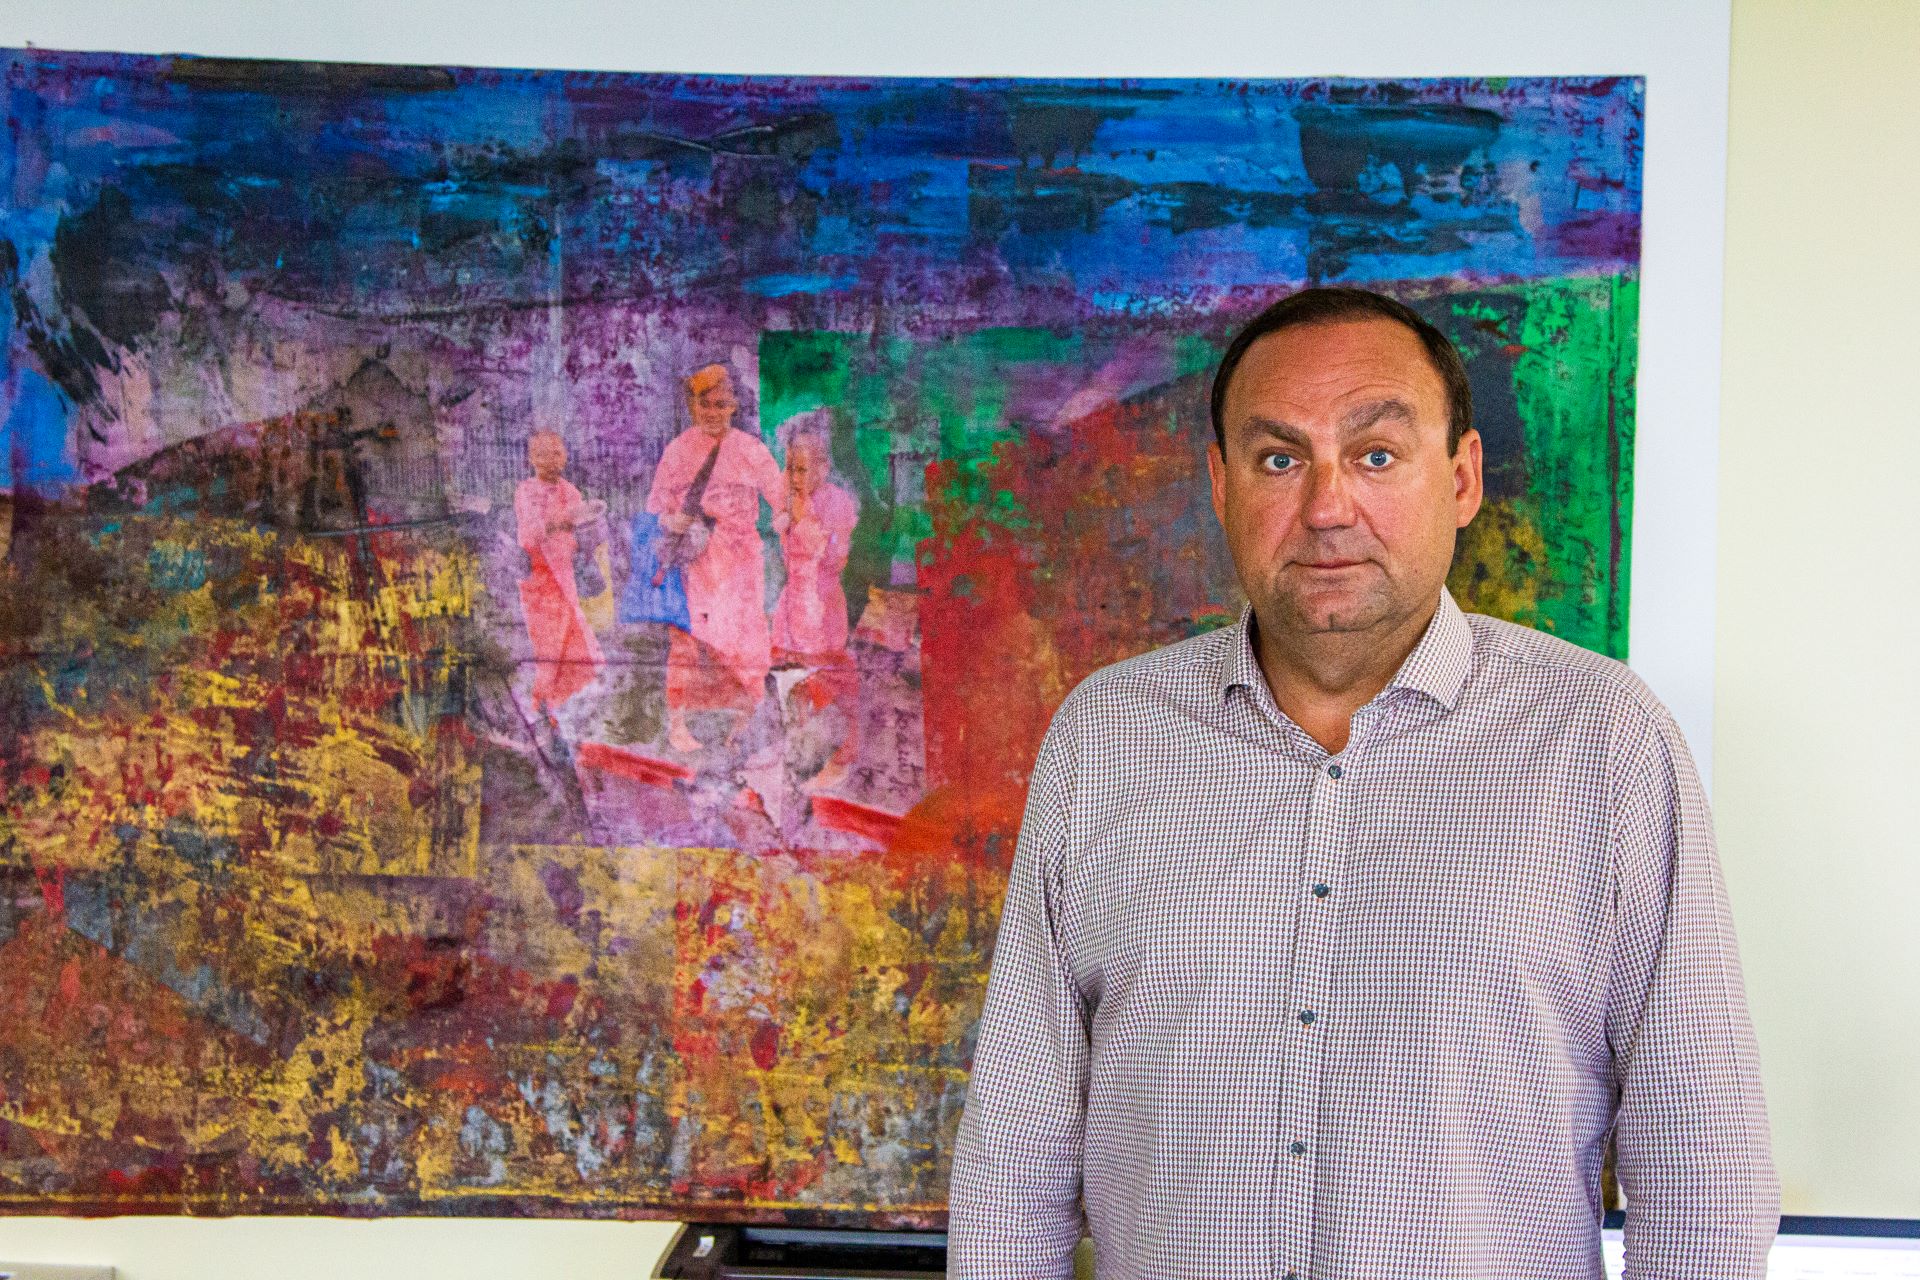 Pav standing with his artwork